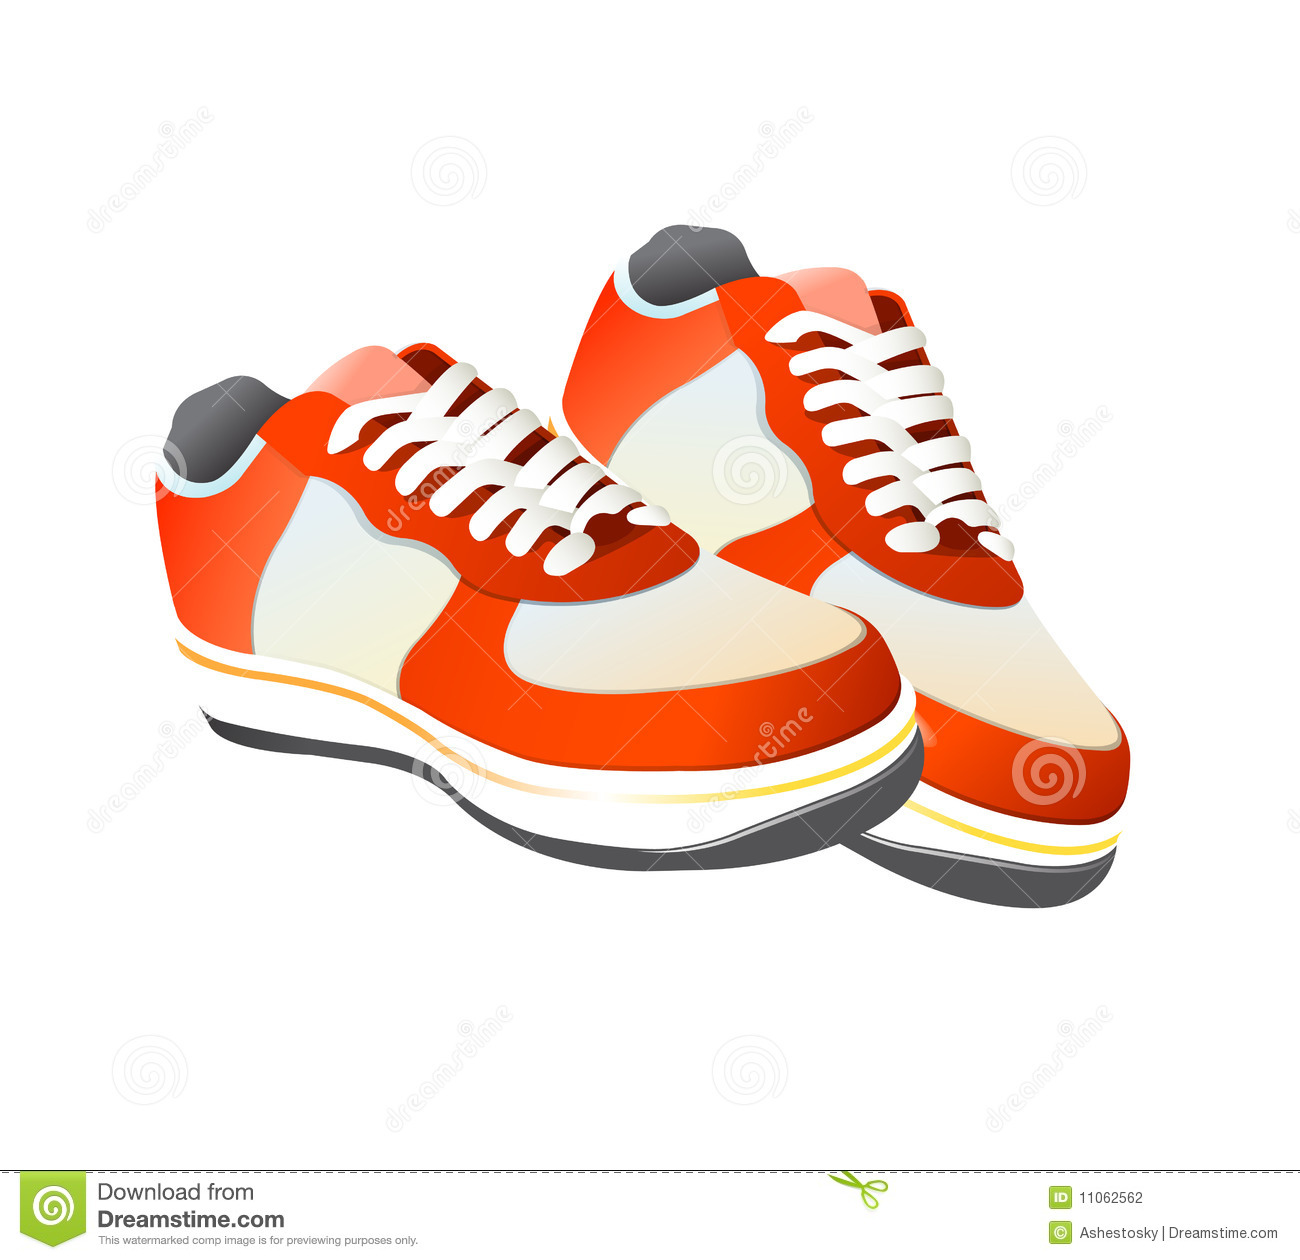 Vector Illustration Of Gym Tennis Shoes Related To Sports And Gym